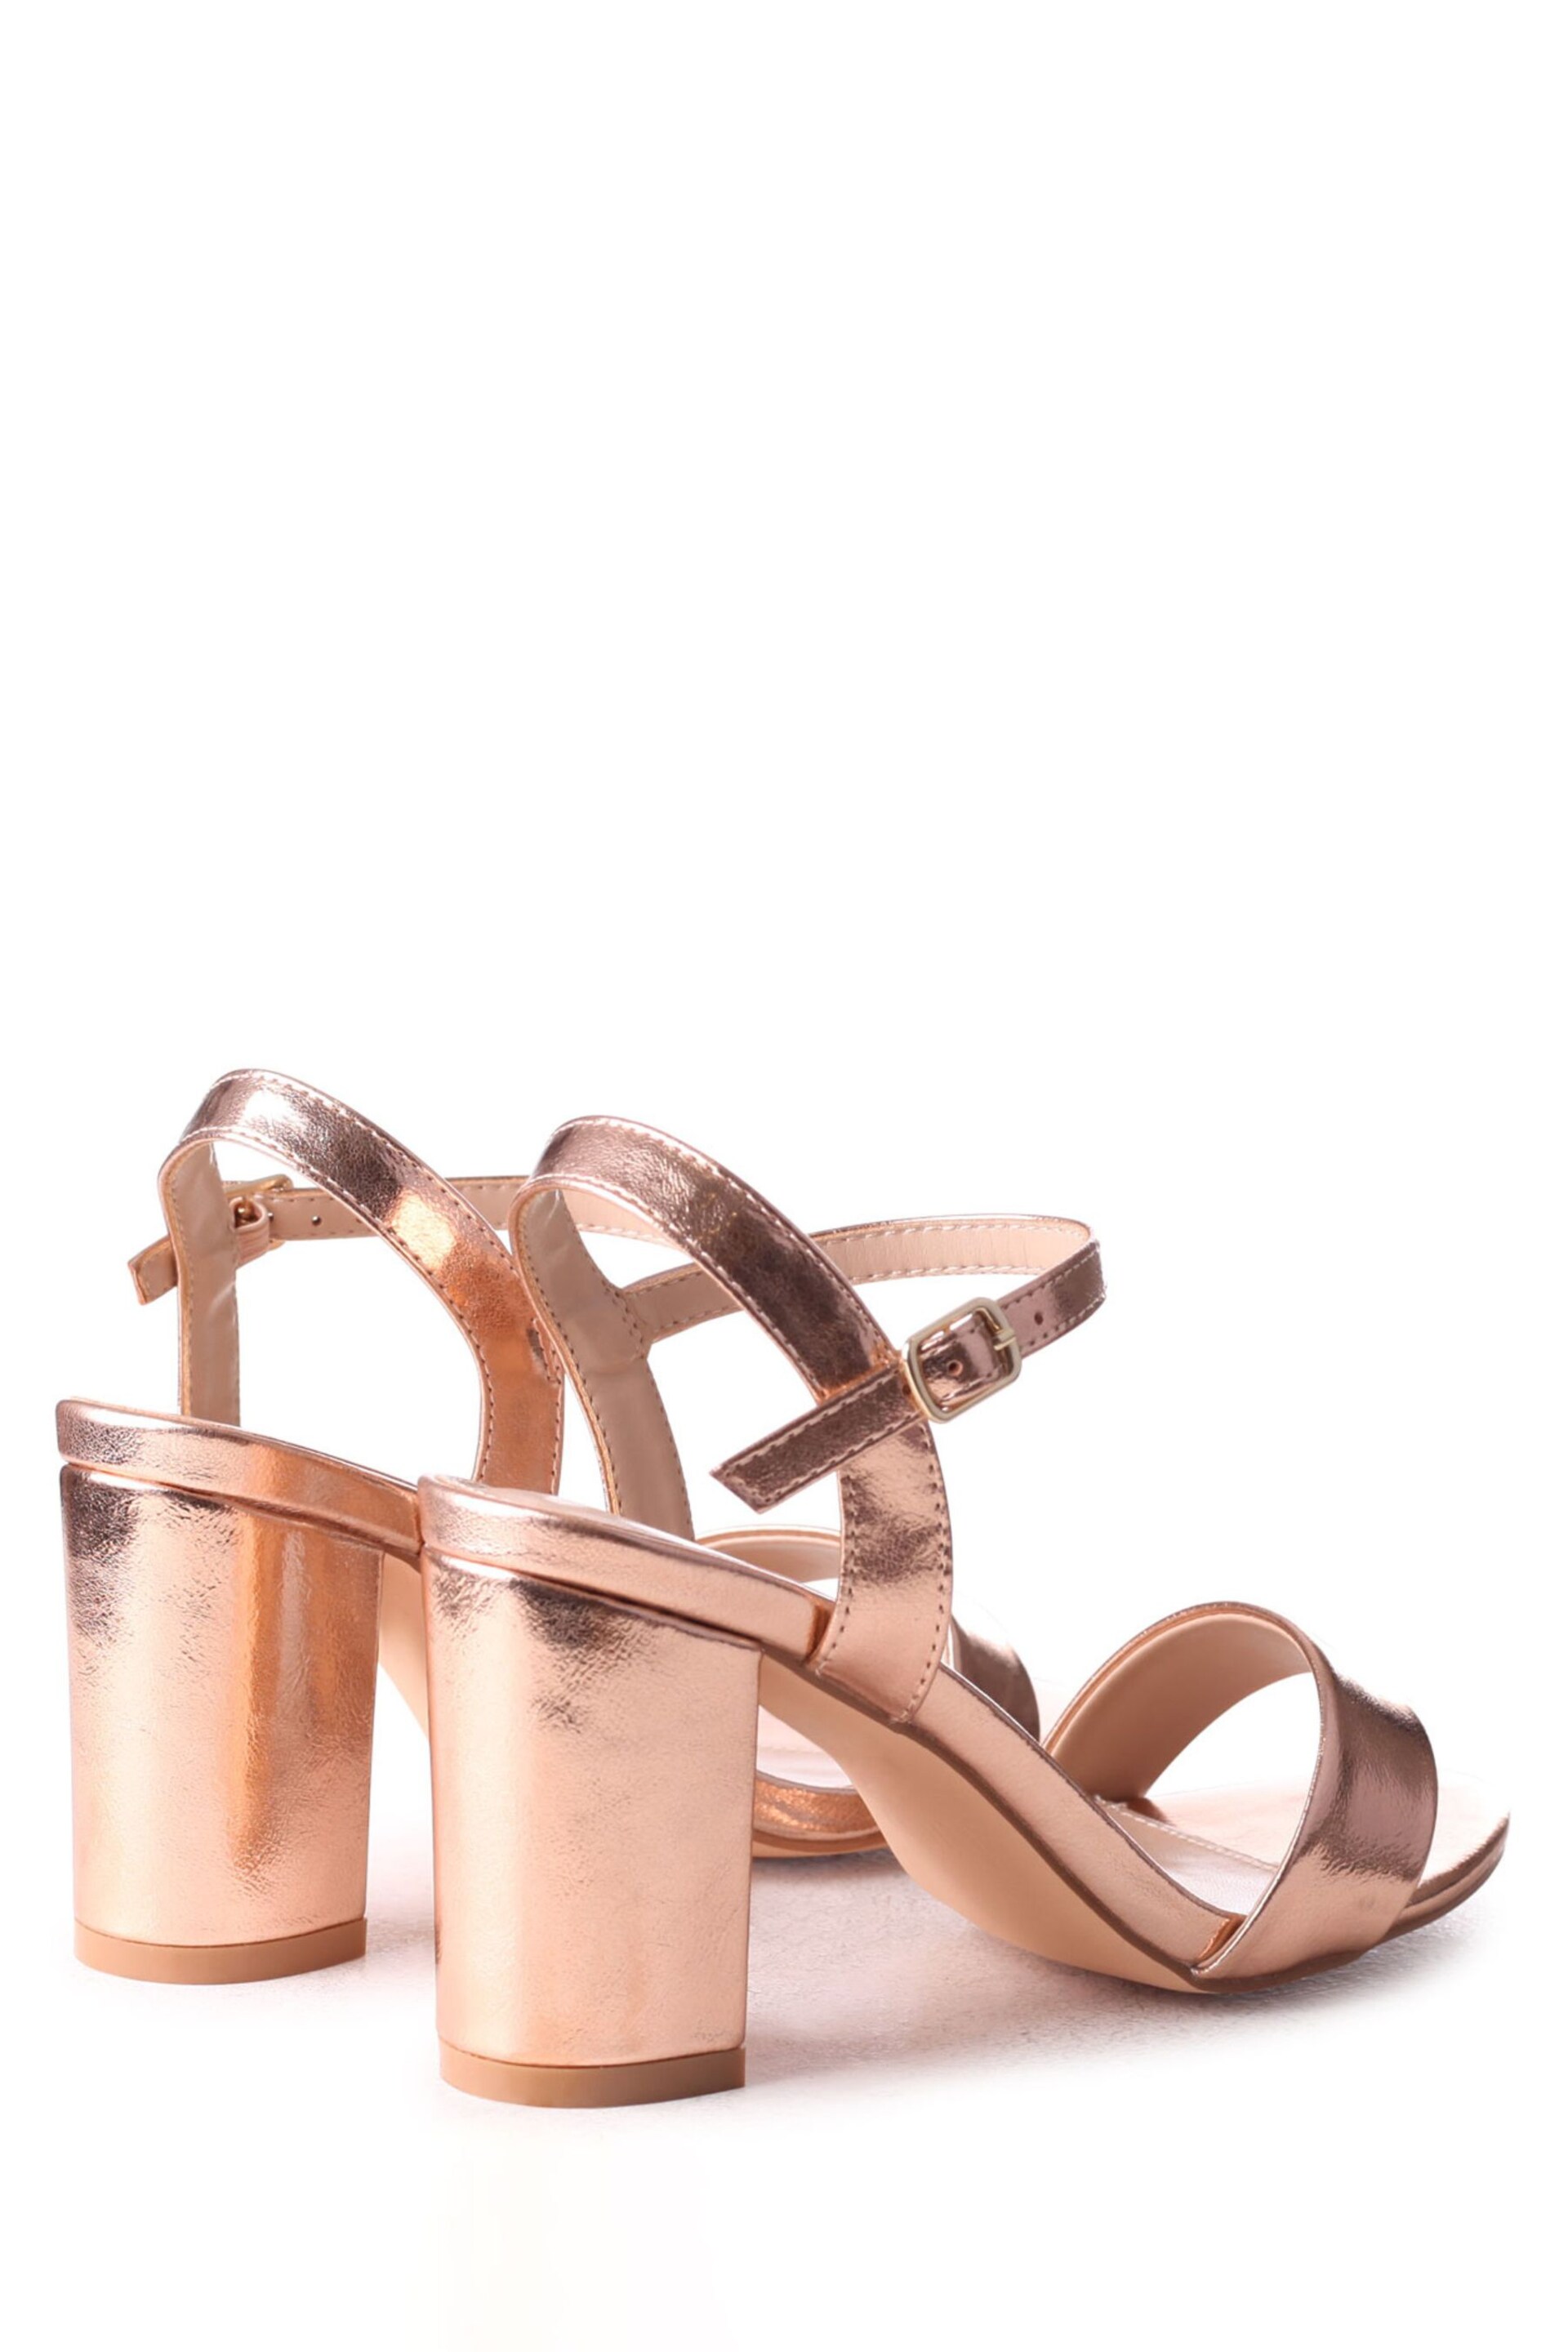 Linzi Rose Gold Skyline Open Back Barely There Block Heels - Image 4 of 4